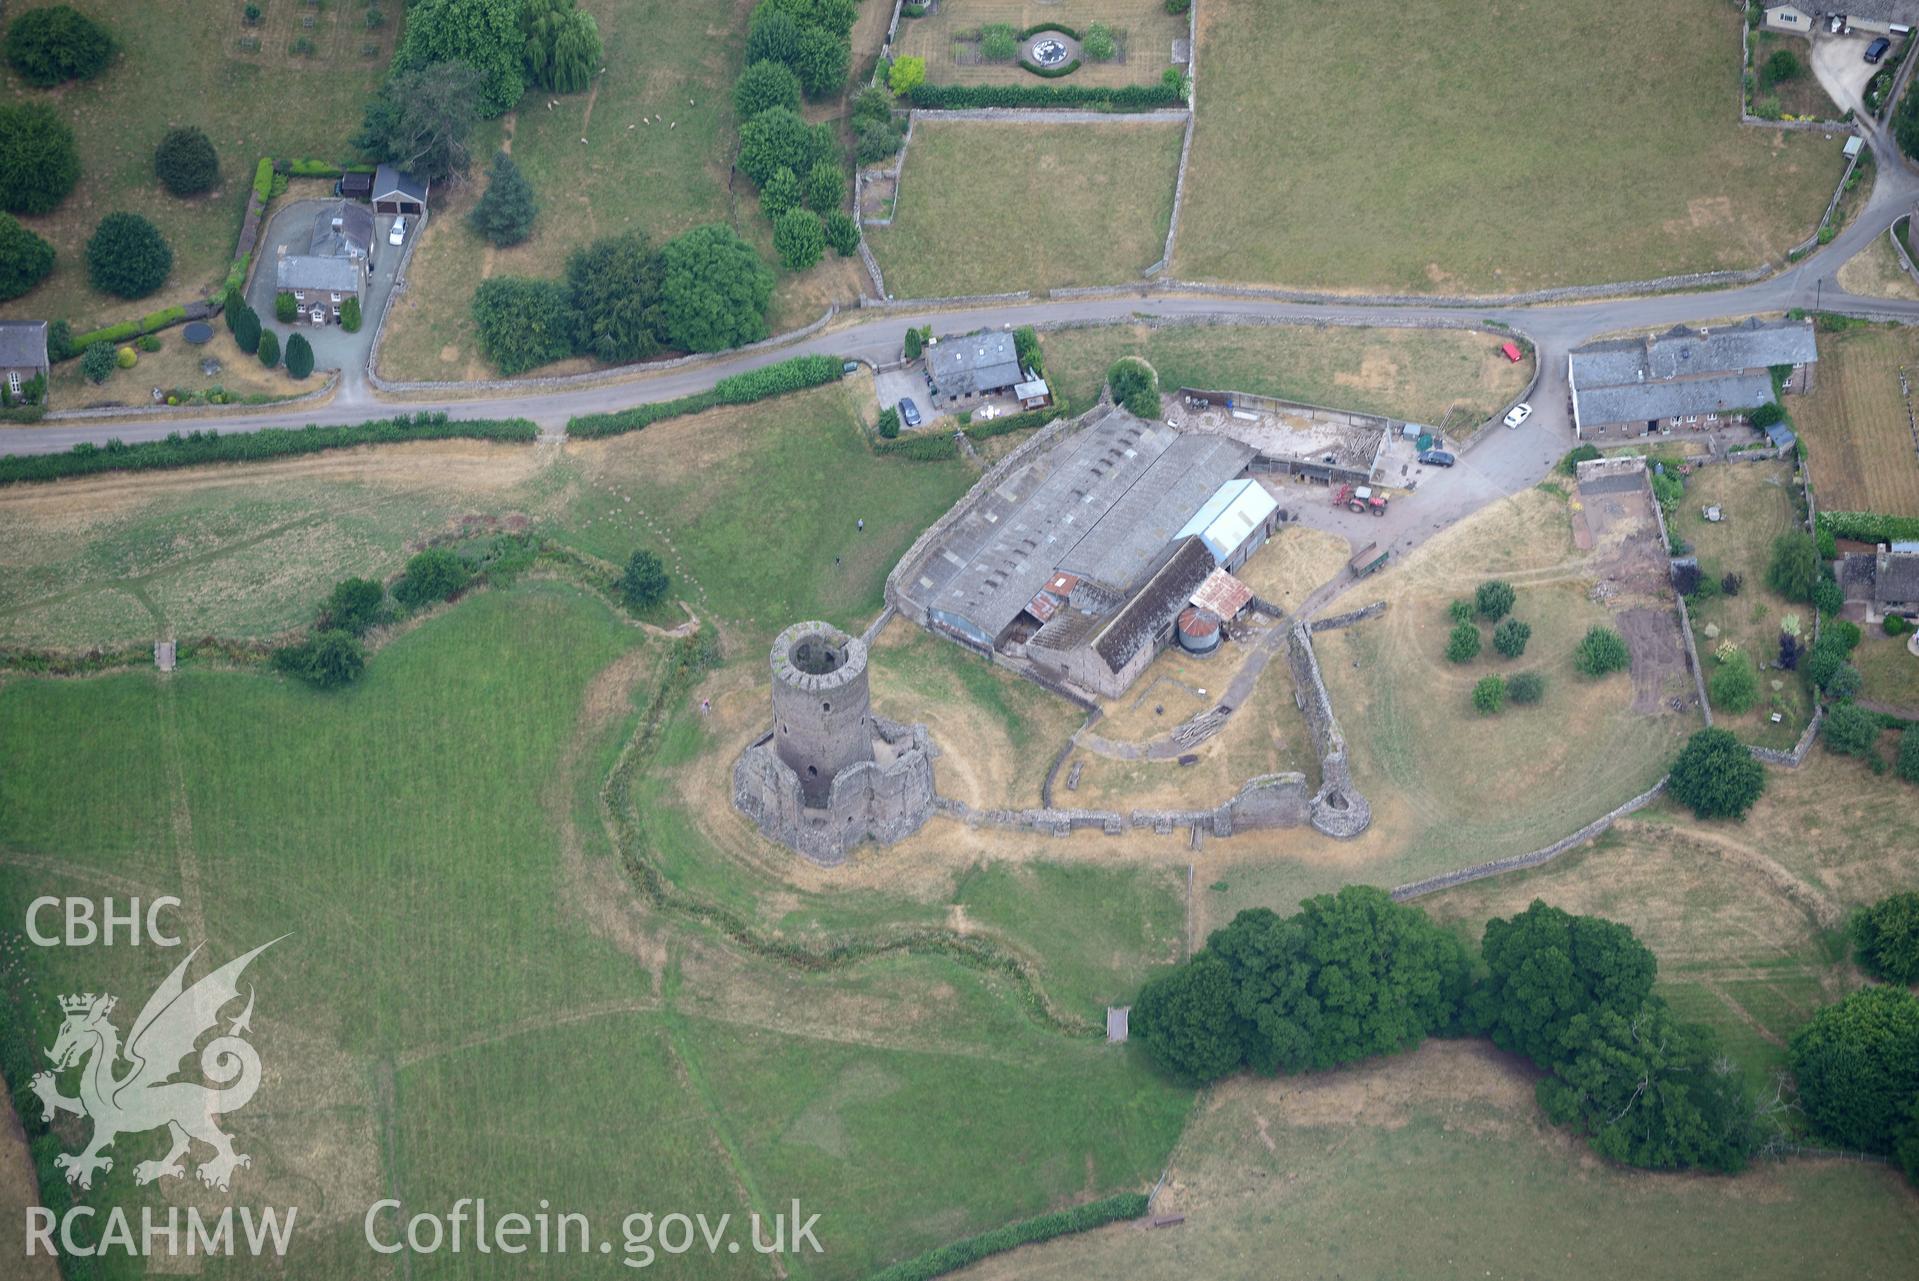 Royal Commission aerial photography of Tretower Castle taken on 19th July 2018 during the 2018 drought.